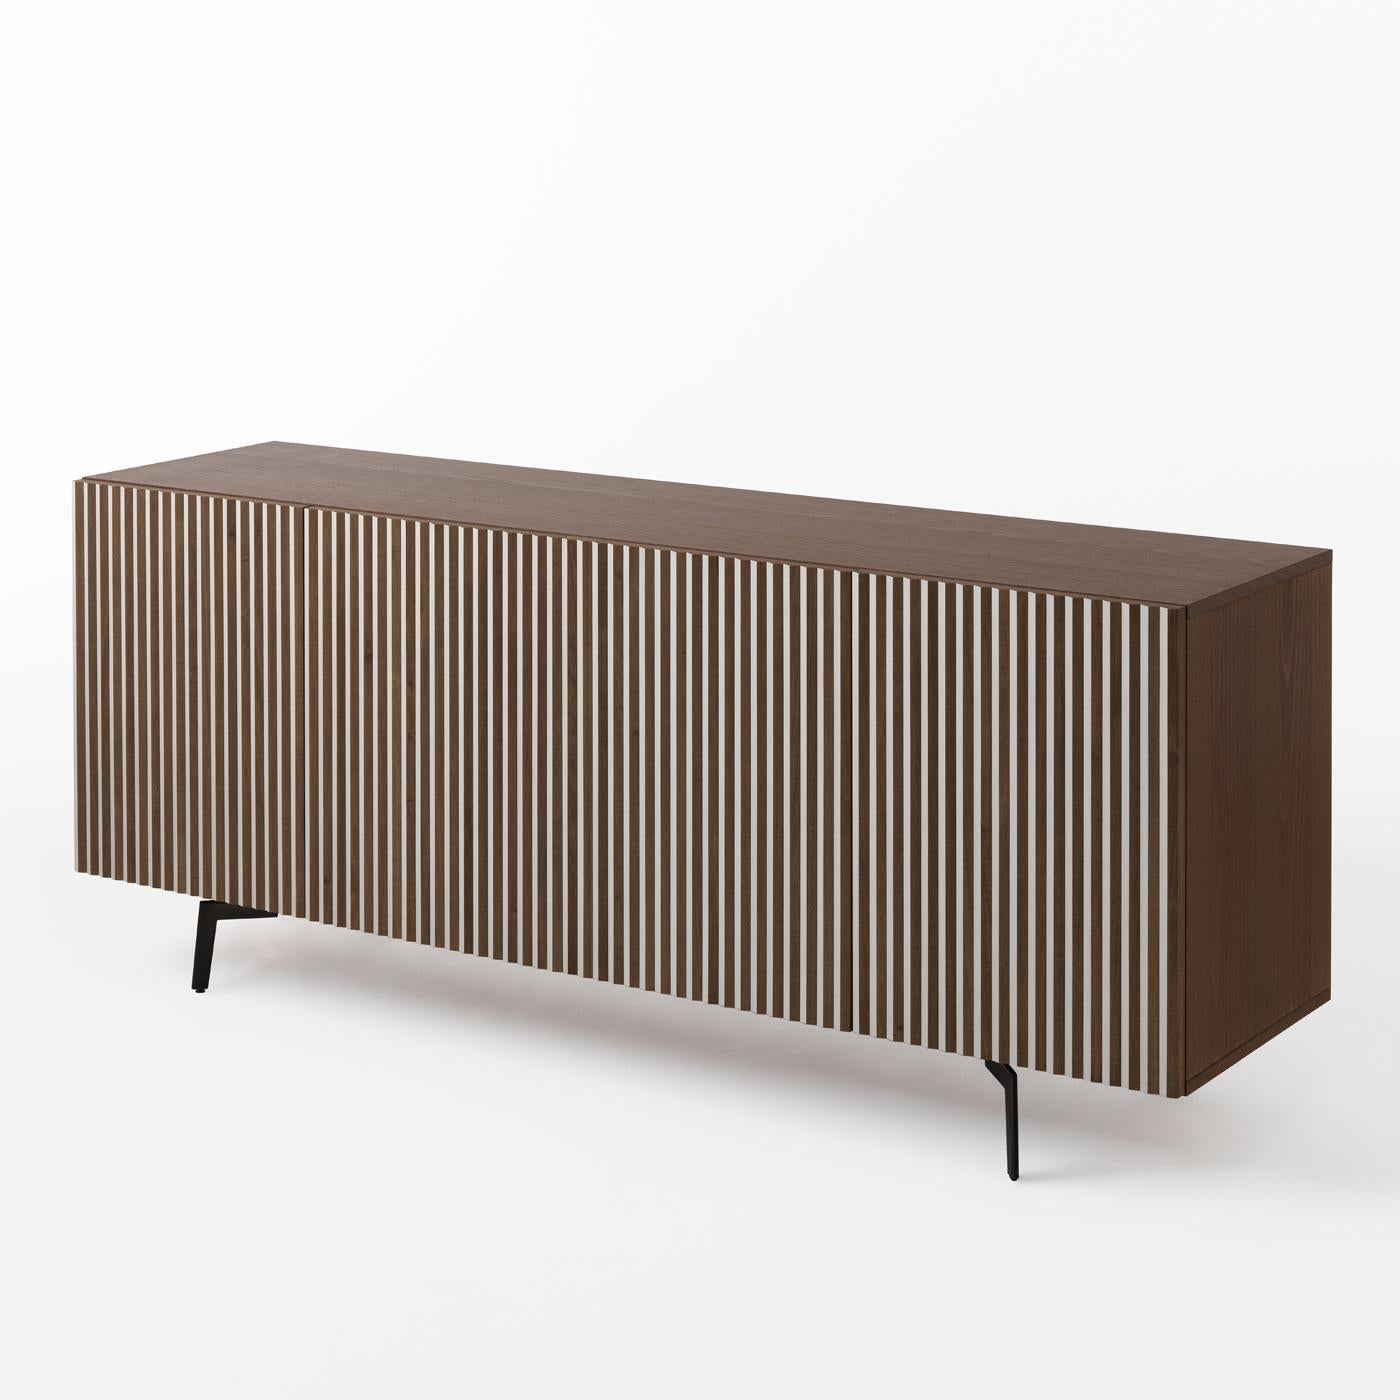 An exercise in contrasts, StH designed this striking piece of functional decor: A superb sideboard boasting captivating optical effect depending on the standpoint from which it is observed. Skillfully crafted of beechwood with a blonde finish, the